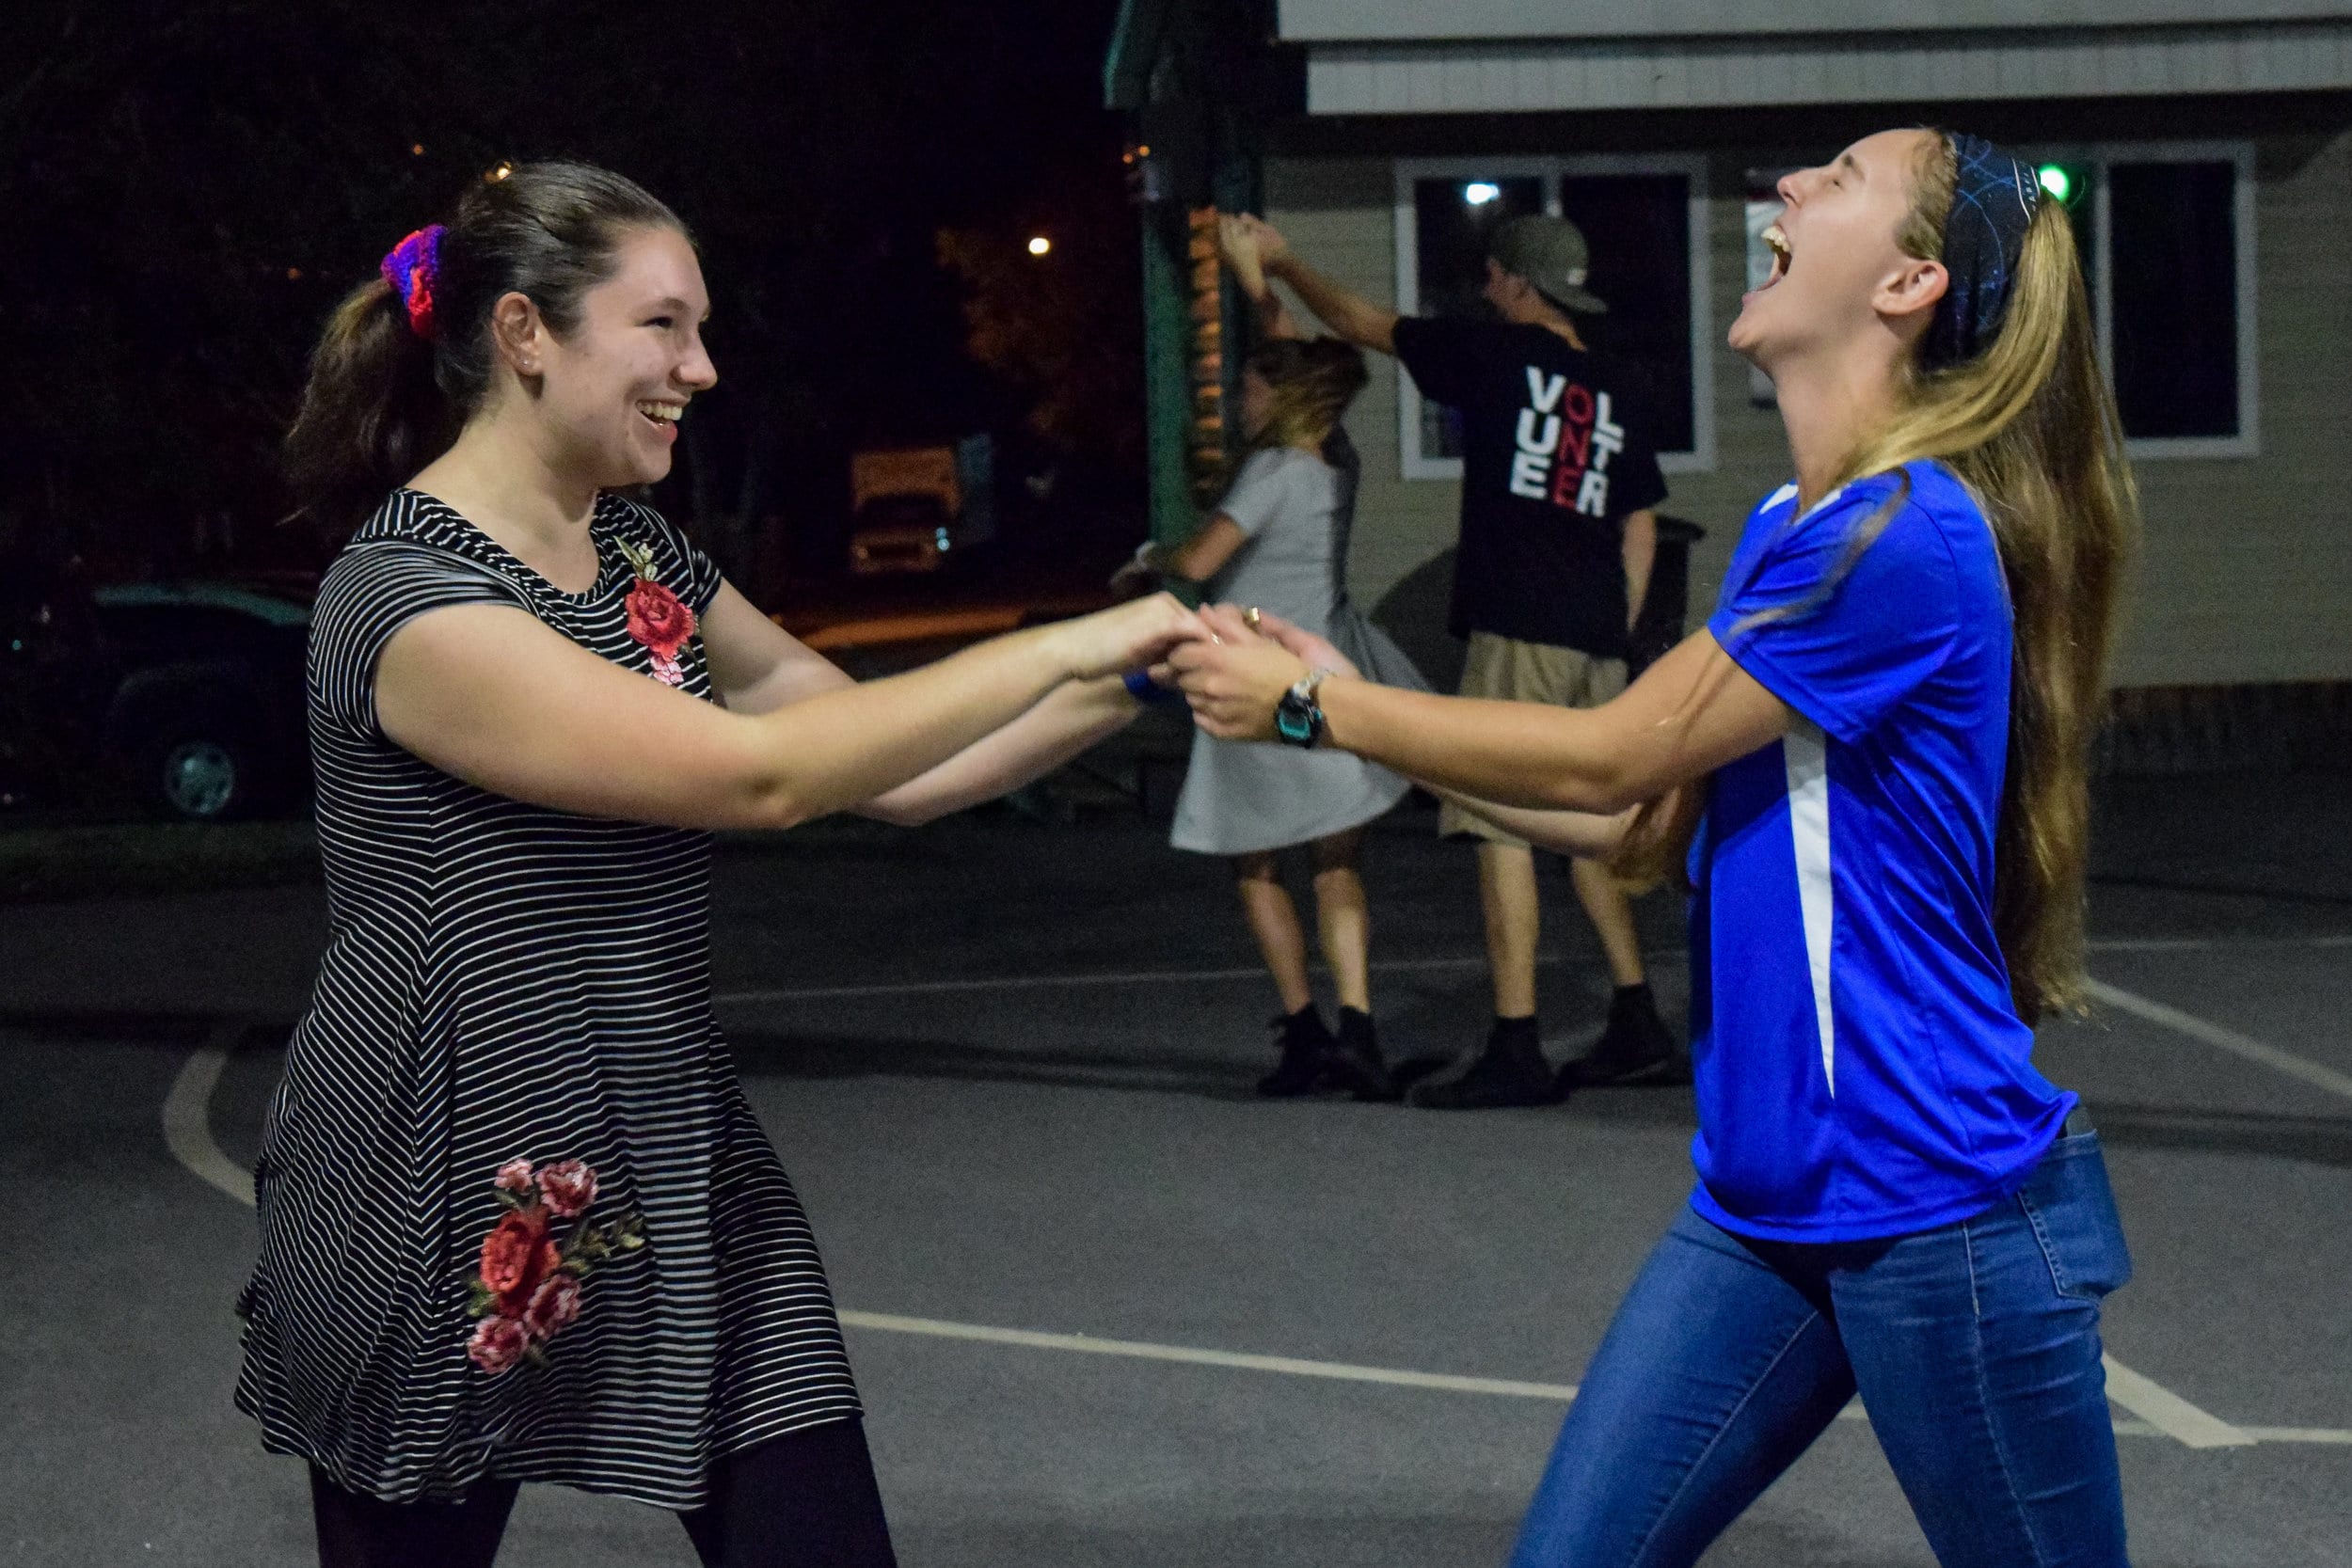 Freshman Sarah Campbell and sophomore Haley Suskin express their joy as they dance together, proving you dont have to have a date to dance.